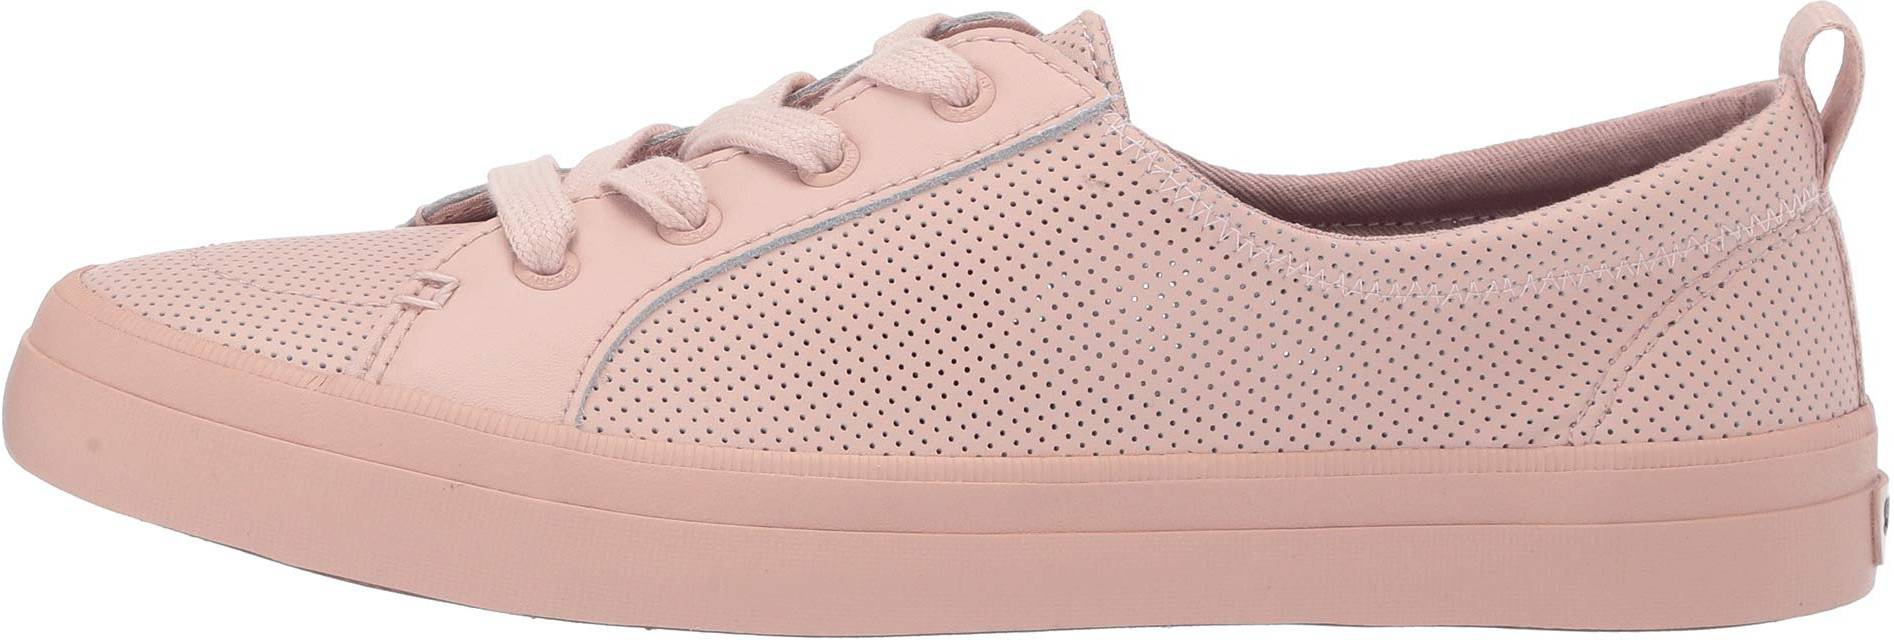 sperry top sider perforated